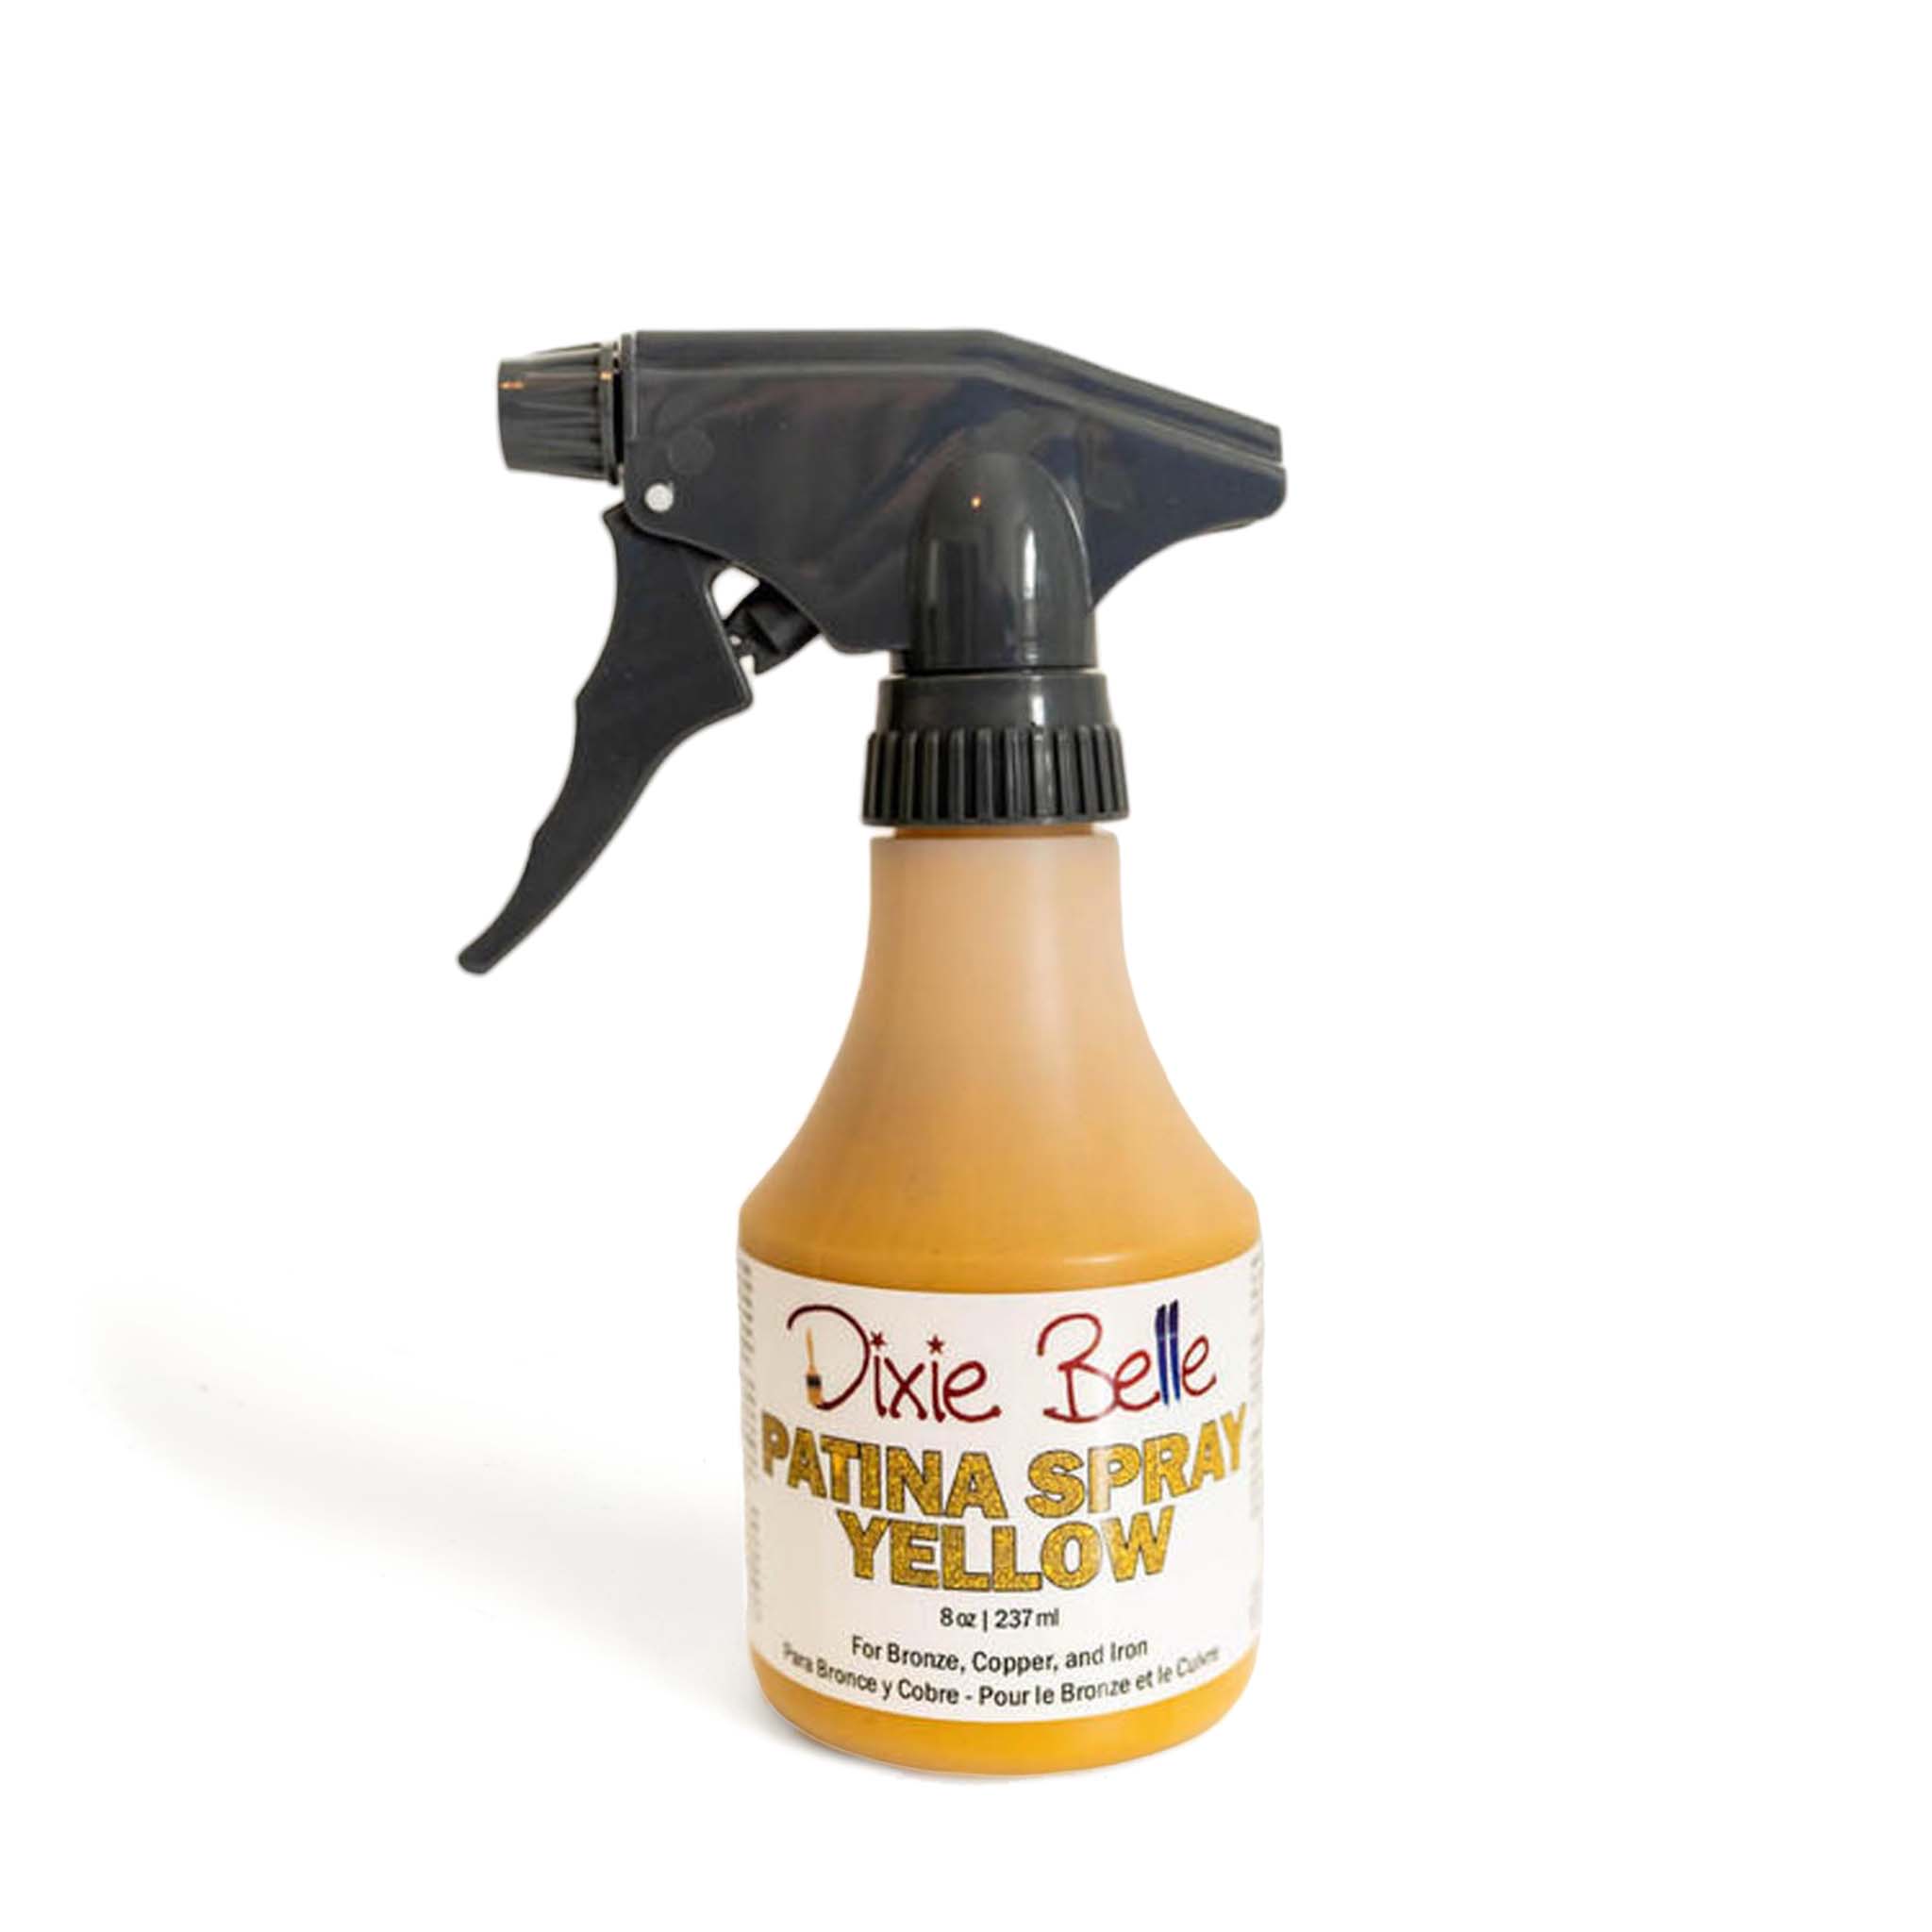 An 8oz spray bottle of Dixie Belle Paint Company's Patina Spray in Yellow is against a white background.